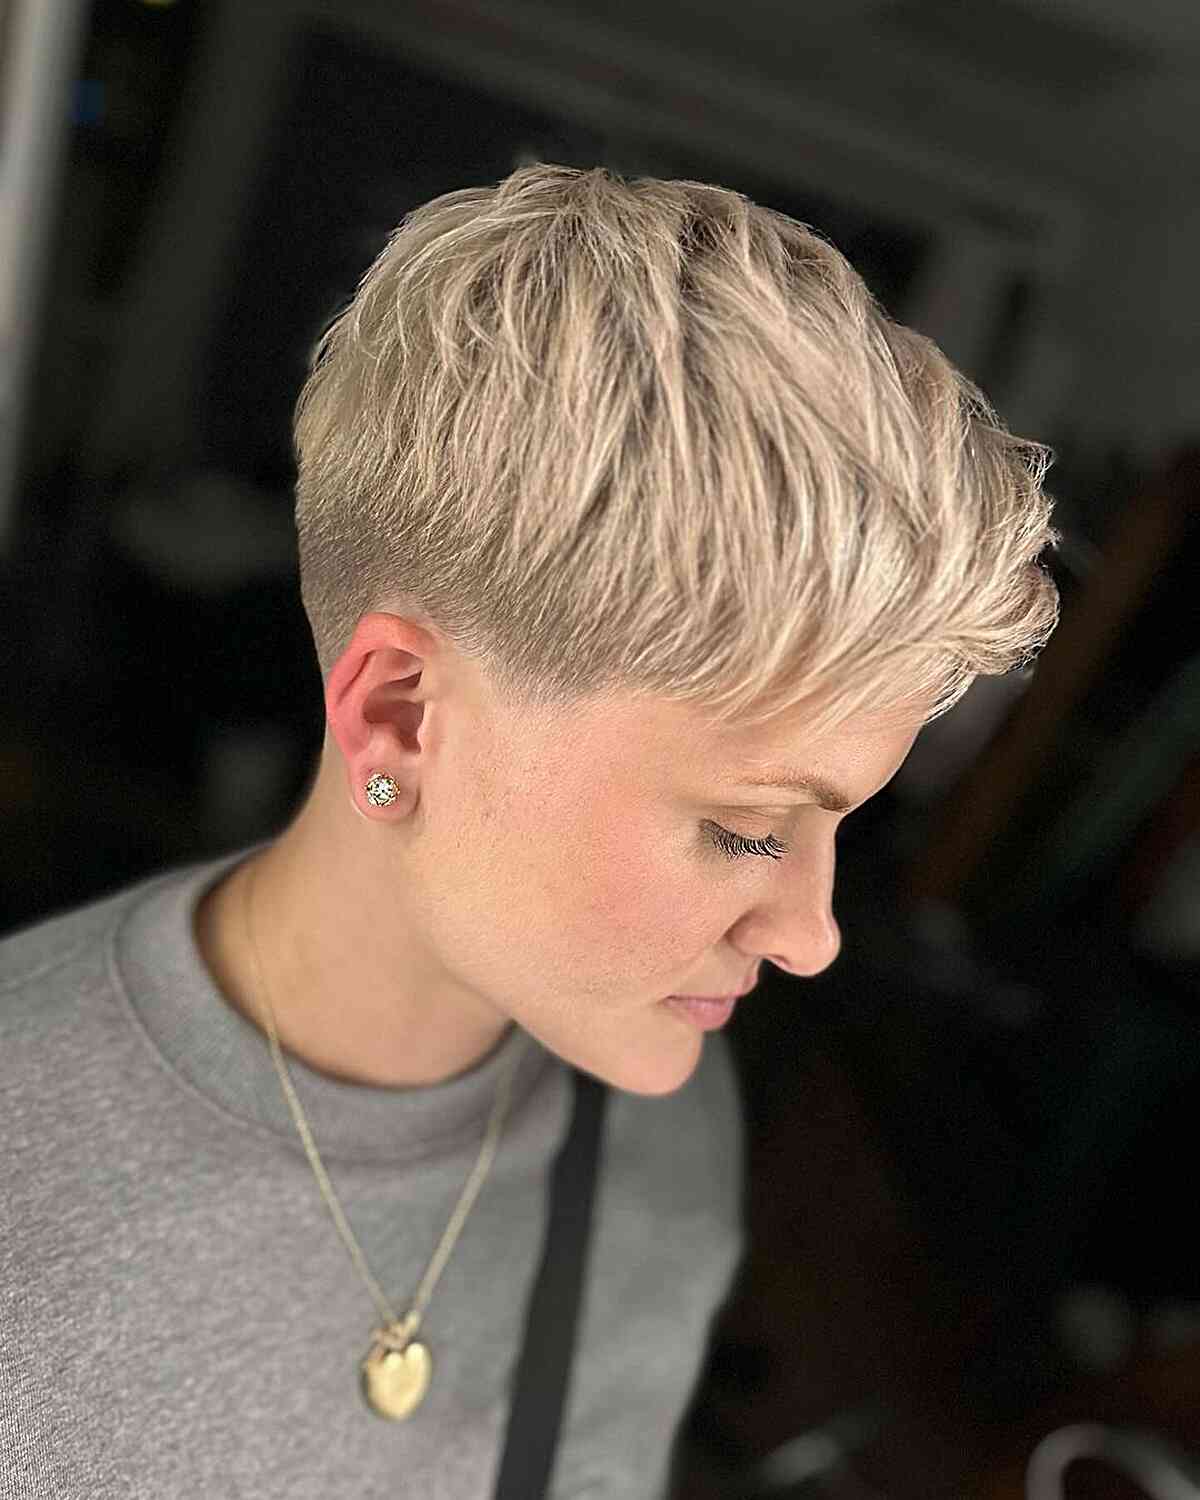 Short 90s-Inspired Pixie Haircut with Fade